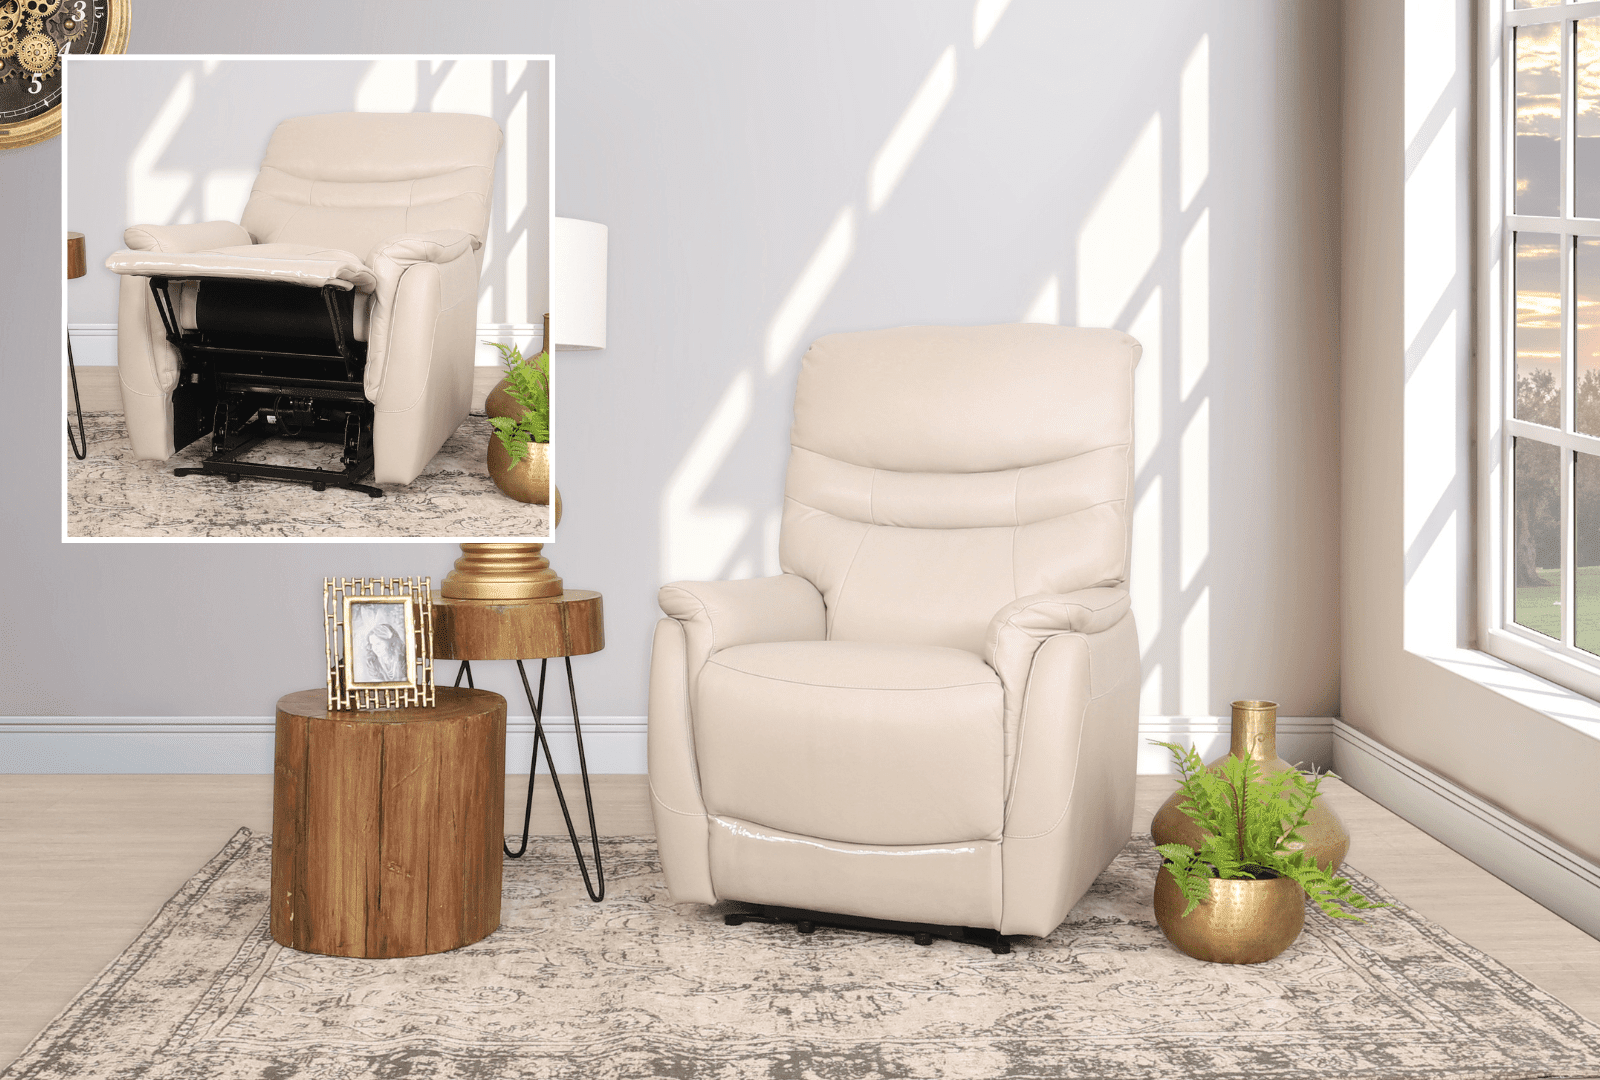 Single Recliners for Different Lifestyles: Finding the Perfect Fit For Your Space & Lifestyle